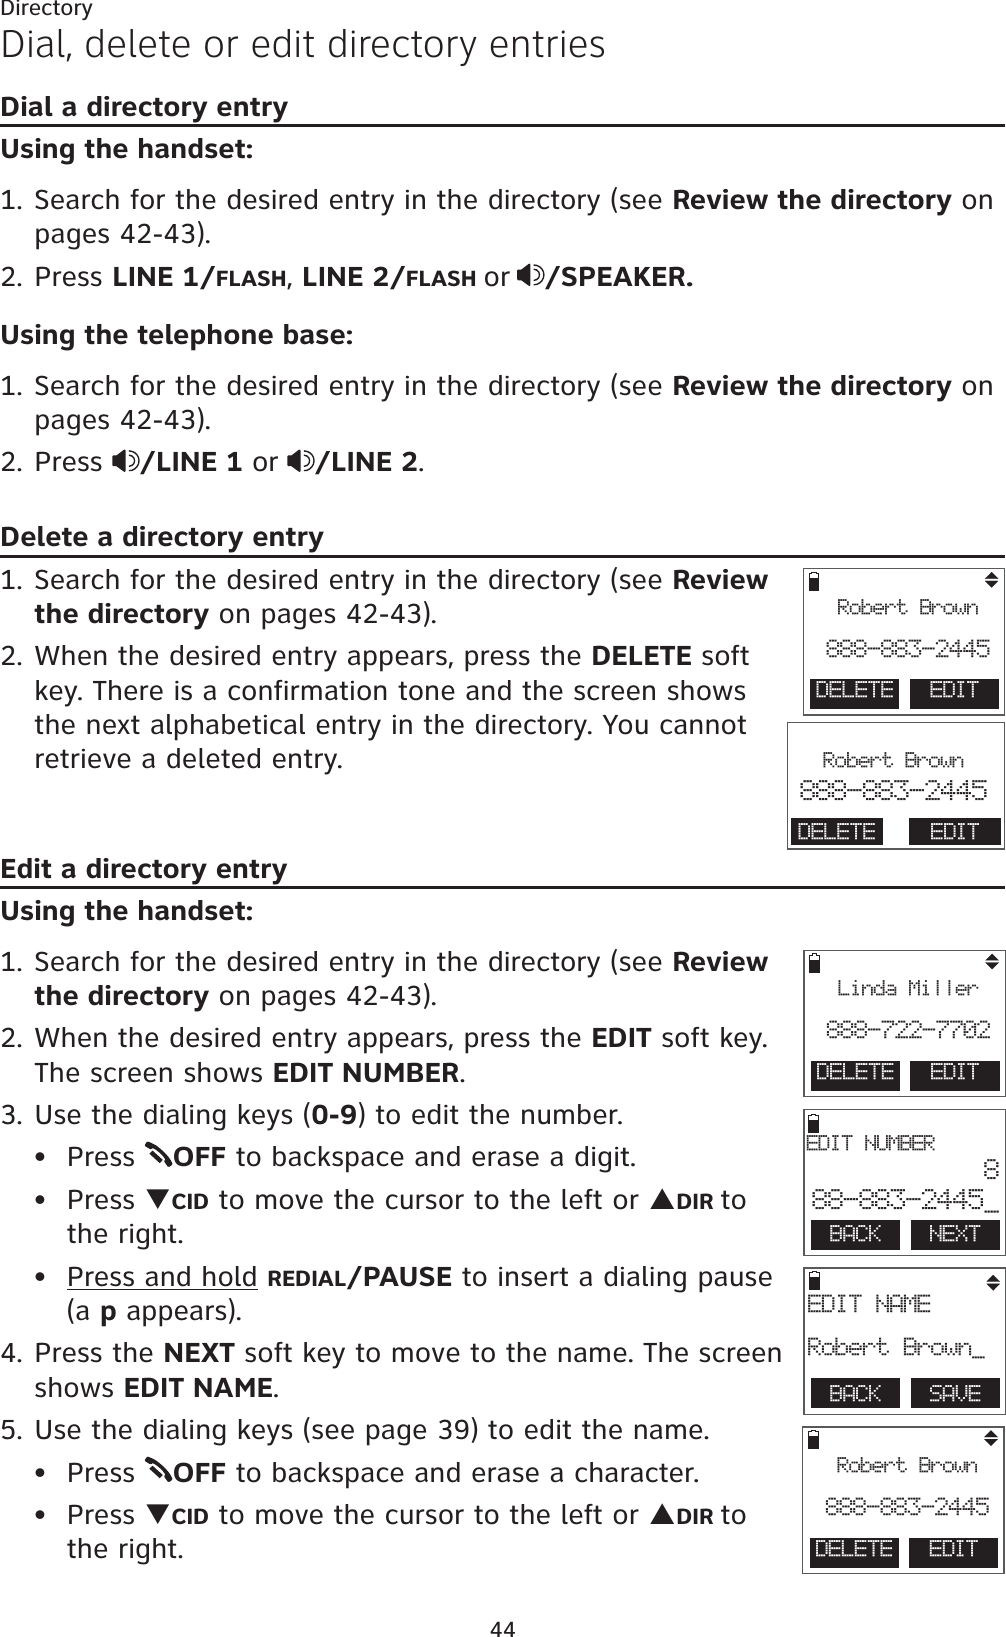 44DirectoryDial, delete or edit directory entriesDial a directory entryUsing the handset:1. Search for the desired entry in the directory (see Review the directory on pages 42-43).2. Press LINE 1/FLASH,LINE 2/FLASH or /SPEAKER.Using the telephone base:1. Search for the desired entry in the directory (see Review the directory on pages 42-43).2. Press  /LINE 1 or /LINE 2.Delete a directory entry1. Search for the desired entry in the directory (see Review the directory on pages 42-43).2. When the desired entry appears, press the DELETE soft key. There is a confirmation tone and the screen shows the next alphabetical entry in the directory. You cannot retrieve a deleted entry.Edit a directory entryUsing the handset:1. Search for the desired entry in the directory (see Review the directory on pages 42-43).2. When the desired entry appears, press the EDIT soft key. The screen shows EDIT NUMBER.3. Use the dialing keys (0-9) to edit the number.Press  OFF to backspace and erase a digit.Press TCID to move the cursor to the left or SDIR to  the right.Press and hold REDIAL/PAUSE to insert a dialing pause (a p appears).4. Press the NEXT soft key to move to the name. The screen shows EDIT NAME.5. Use the dialing keys (see page 39) to edit the name.Press  OFF to backspace and erase a character.Press TCID to move the cursor to the left or SDIR to  the right.•••••BACK    NEXTEDIT NUMBER888-883-2445_BACK    SAVEEDIT NAMERobert Brown_DELETE  EDITLinda Miller888-722-7702DELETE  EDITRobert Brown888-883-2445DELETE  EDITRobert Brown888-883-2445                       Robert Brown888-883-2445DELETE EDIT